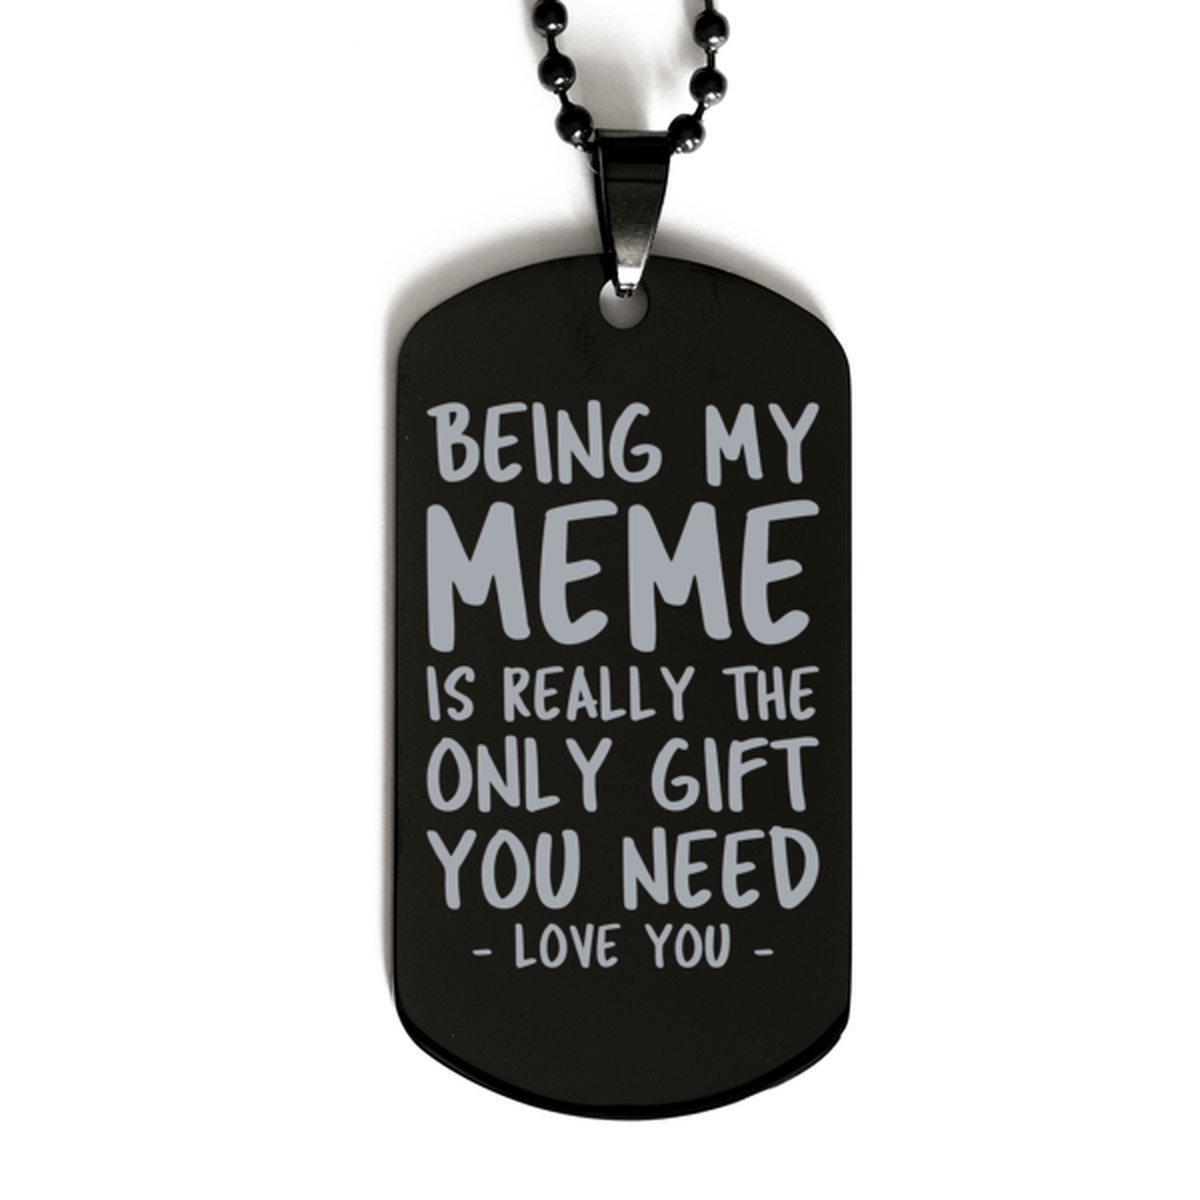 Funny Meme Black Dog Tag Necklace, Being My Meme Is Really the Only Gift You Need, Best Birthday Gifts for Meme